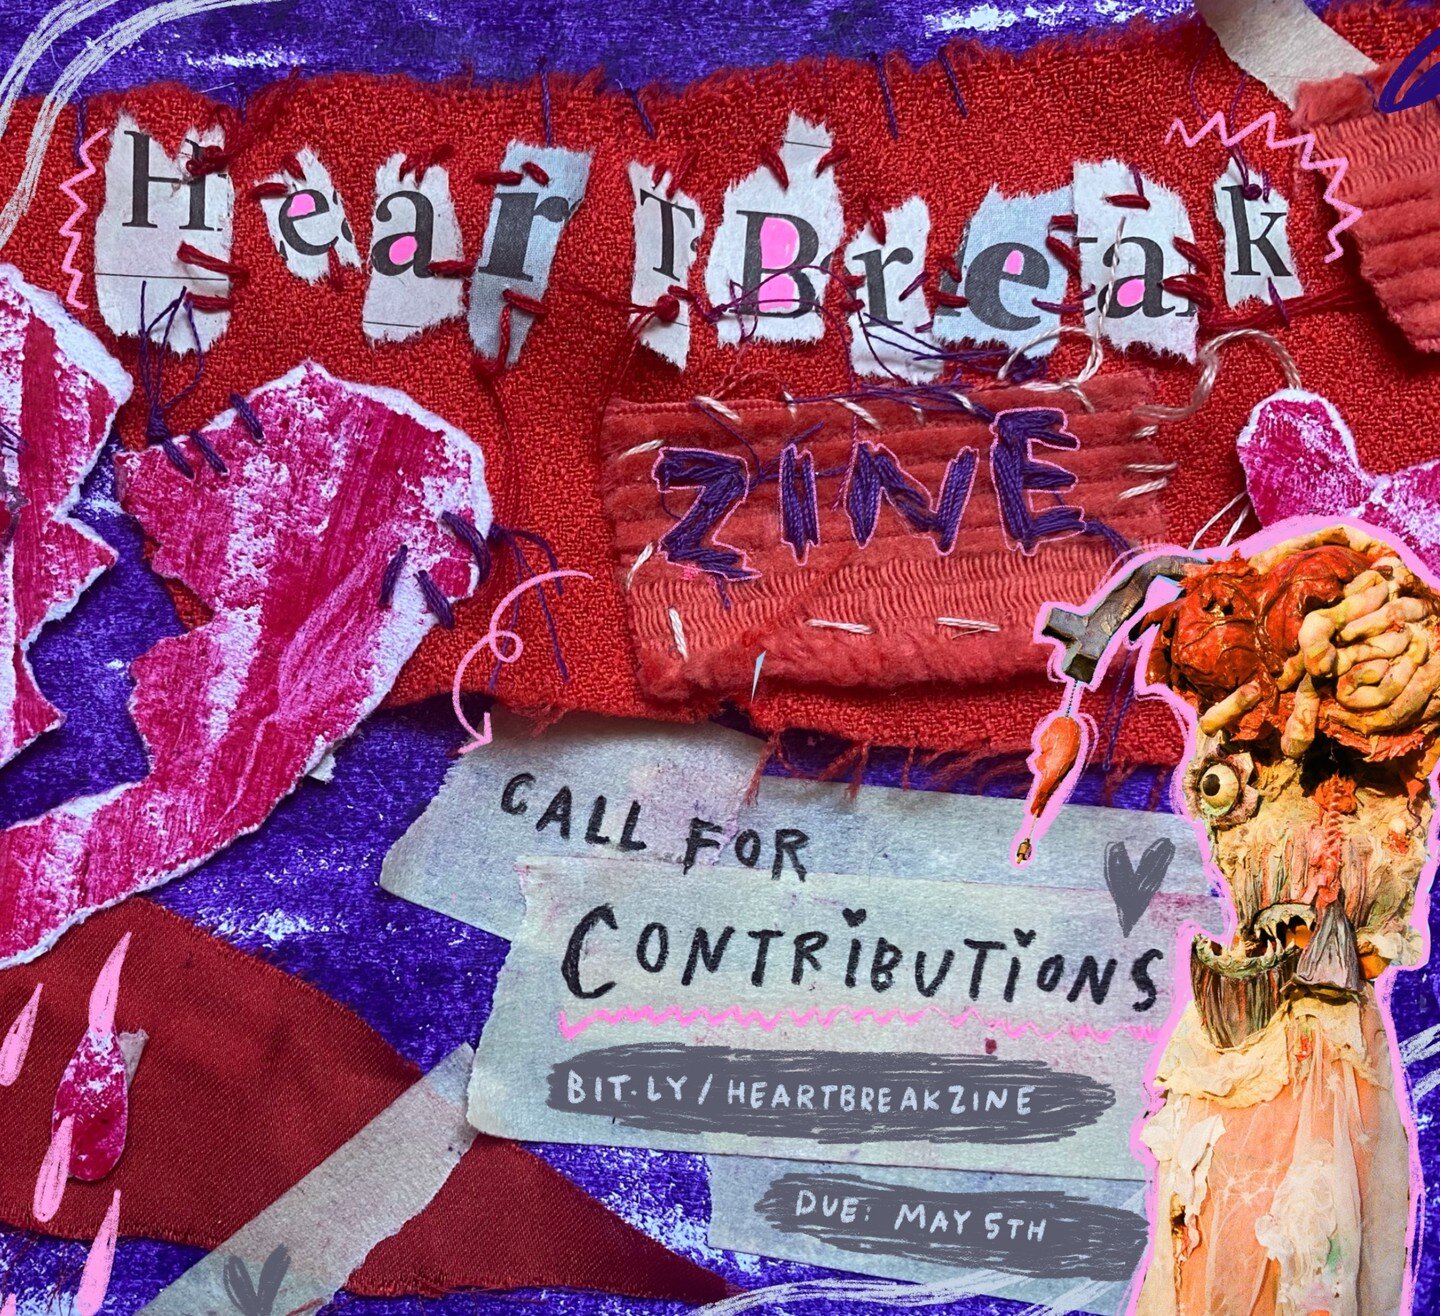 Call for Submissions: 💔 HEARTBREAK ZINE 💔 Due Friday, May 5th! Link in bio! Keeping it really open-ended, so anything goes under the theme of ~heartbreak~. Please share with the goopey hearts in your life!~~~

I had the idea to make some sort of ~H